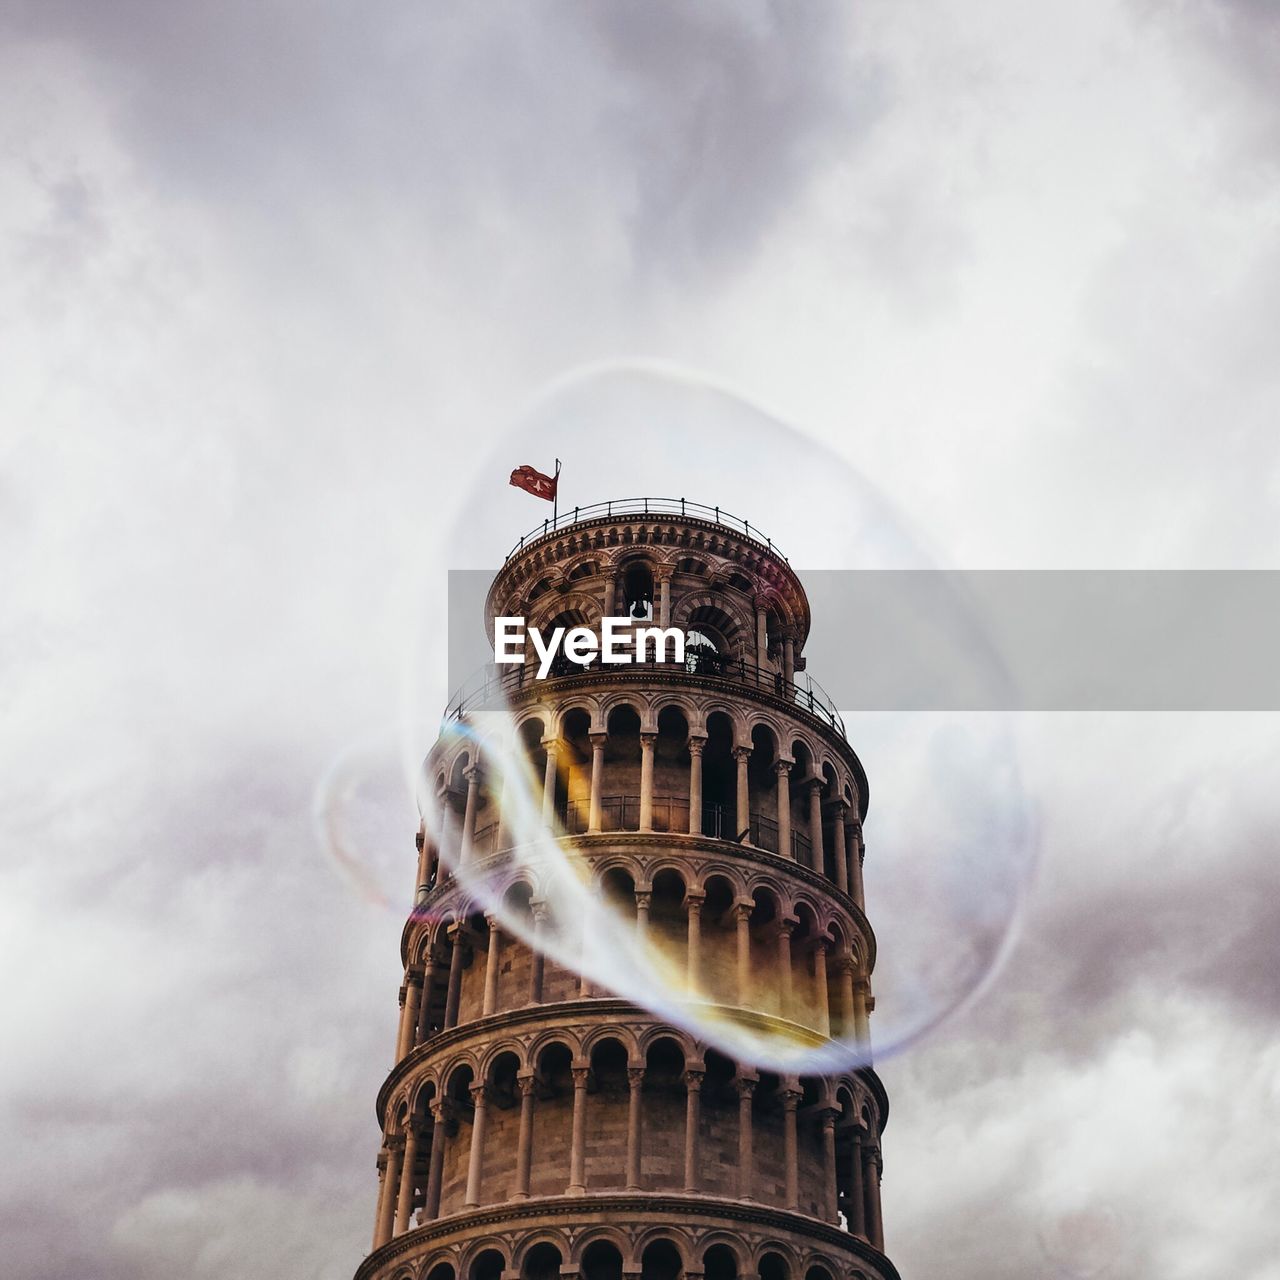 Leaning tower of pisa seen through bubbles against cloudy sky